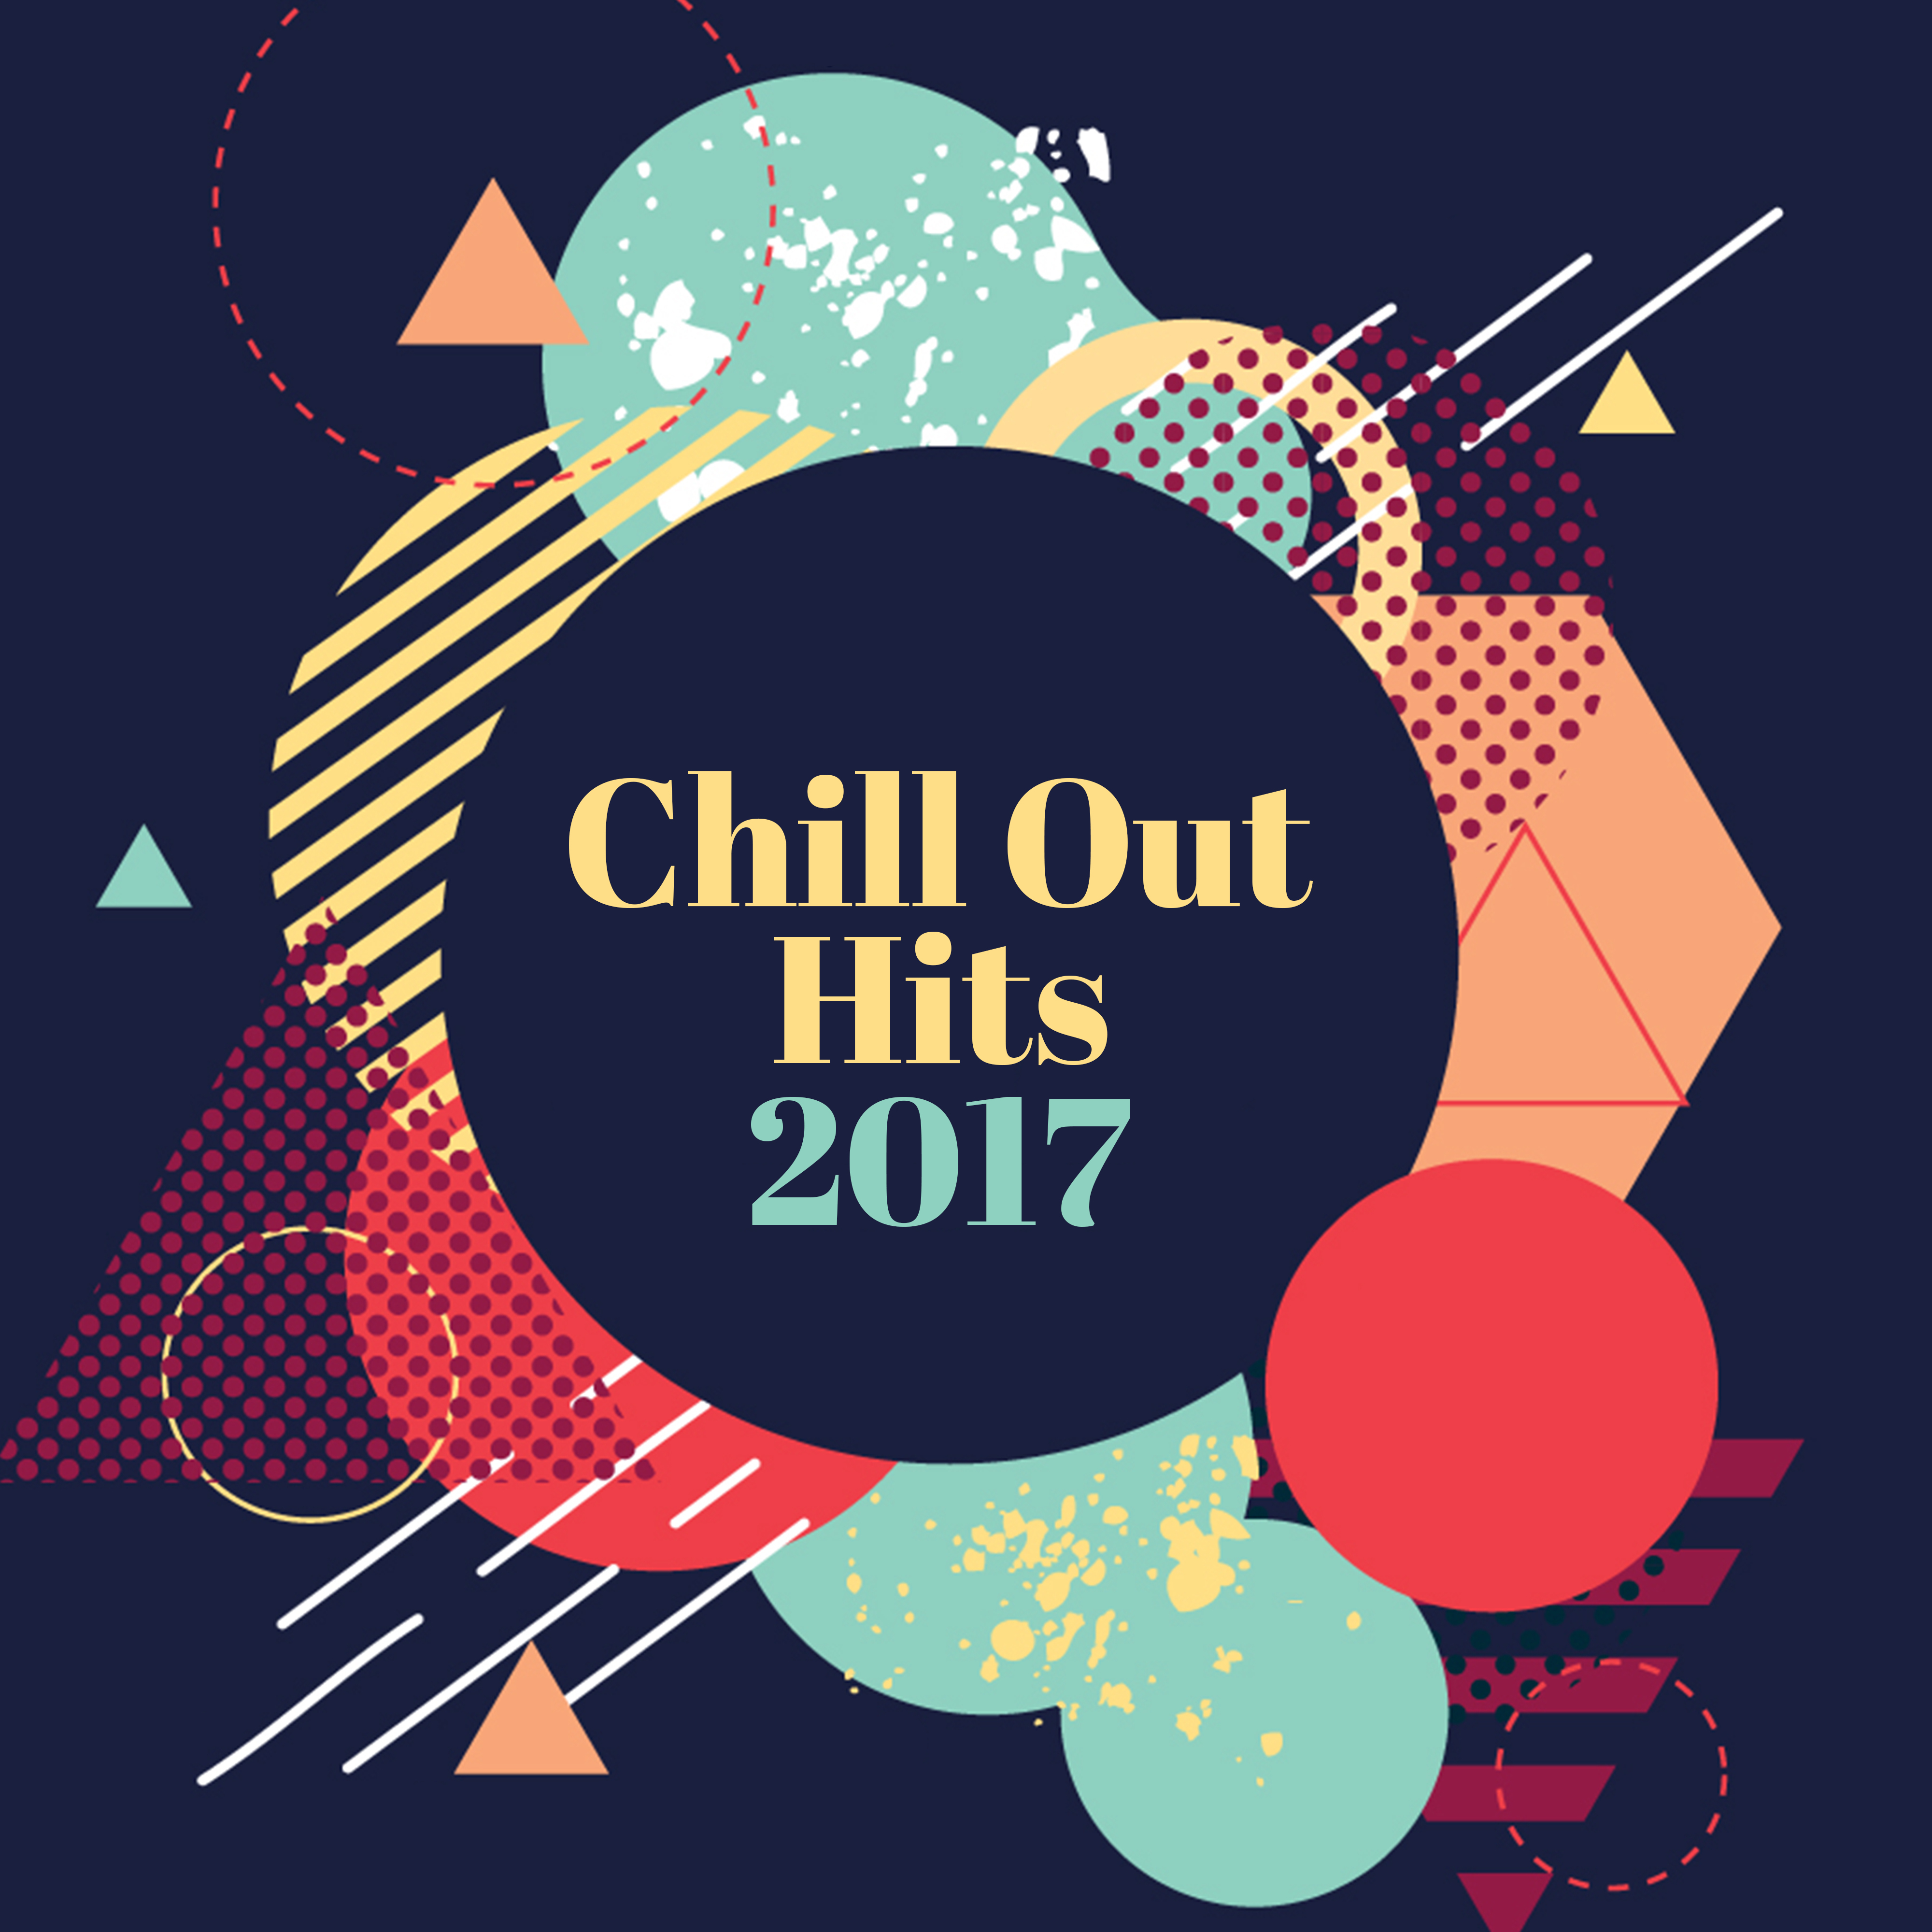 Chill Out Hits 2017